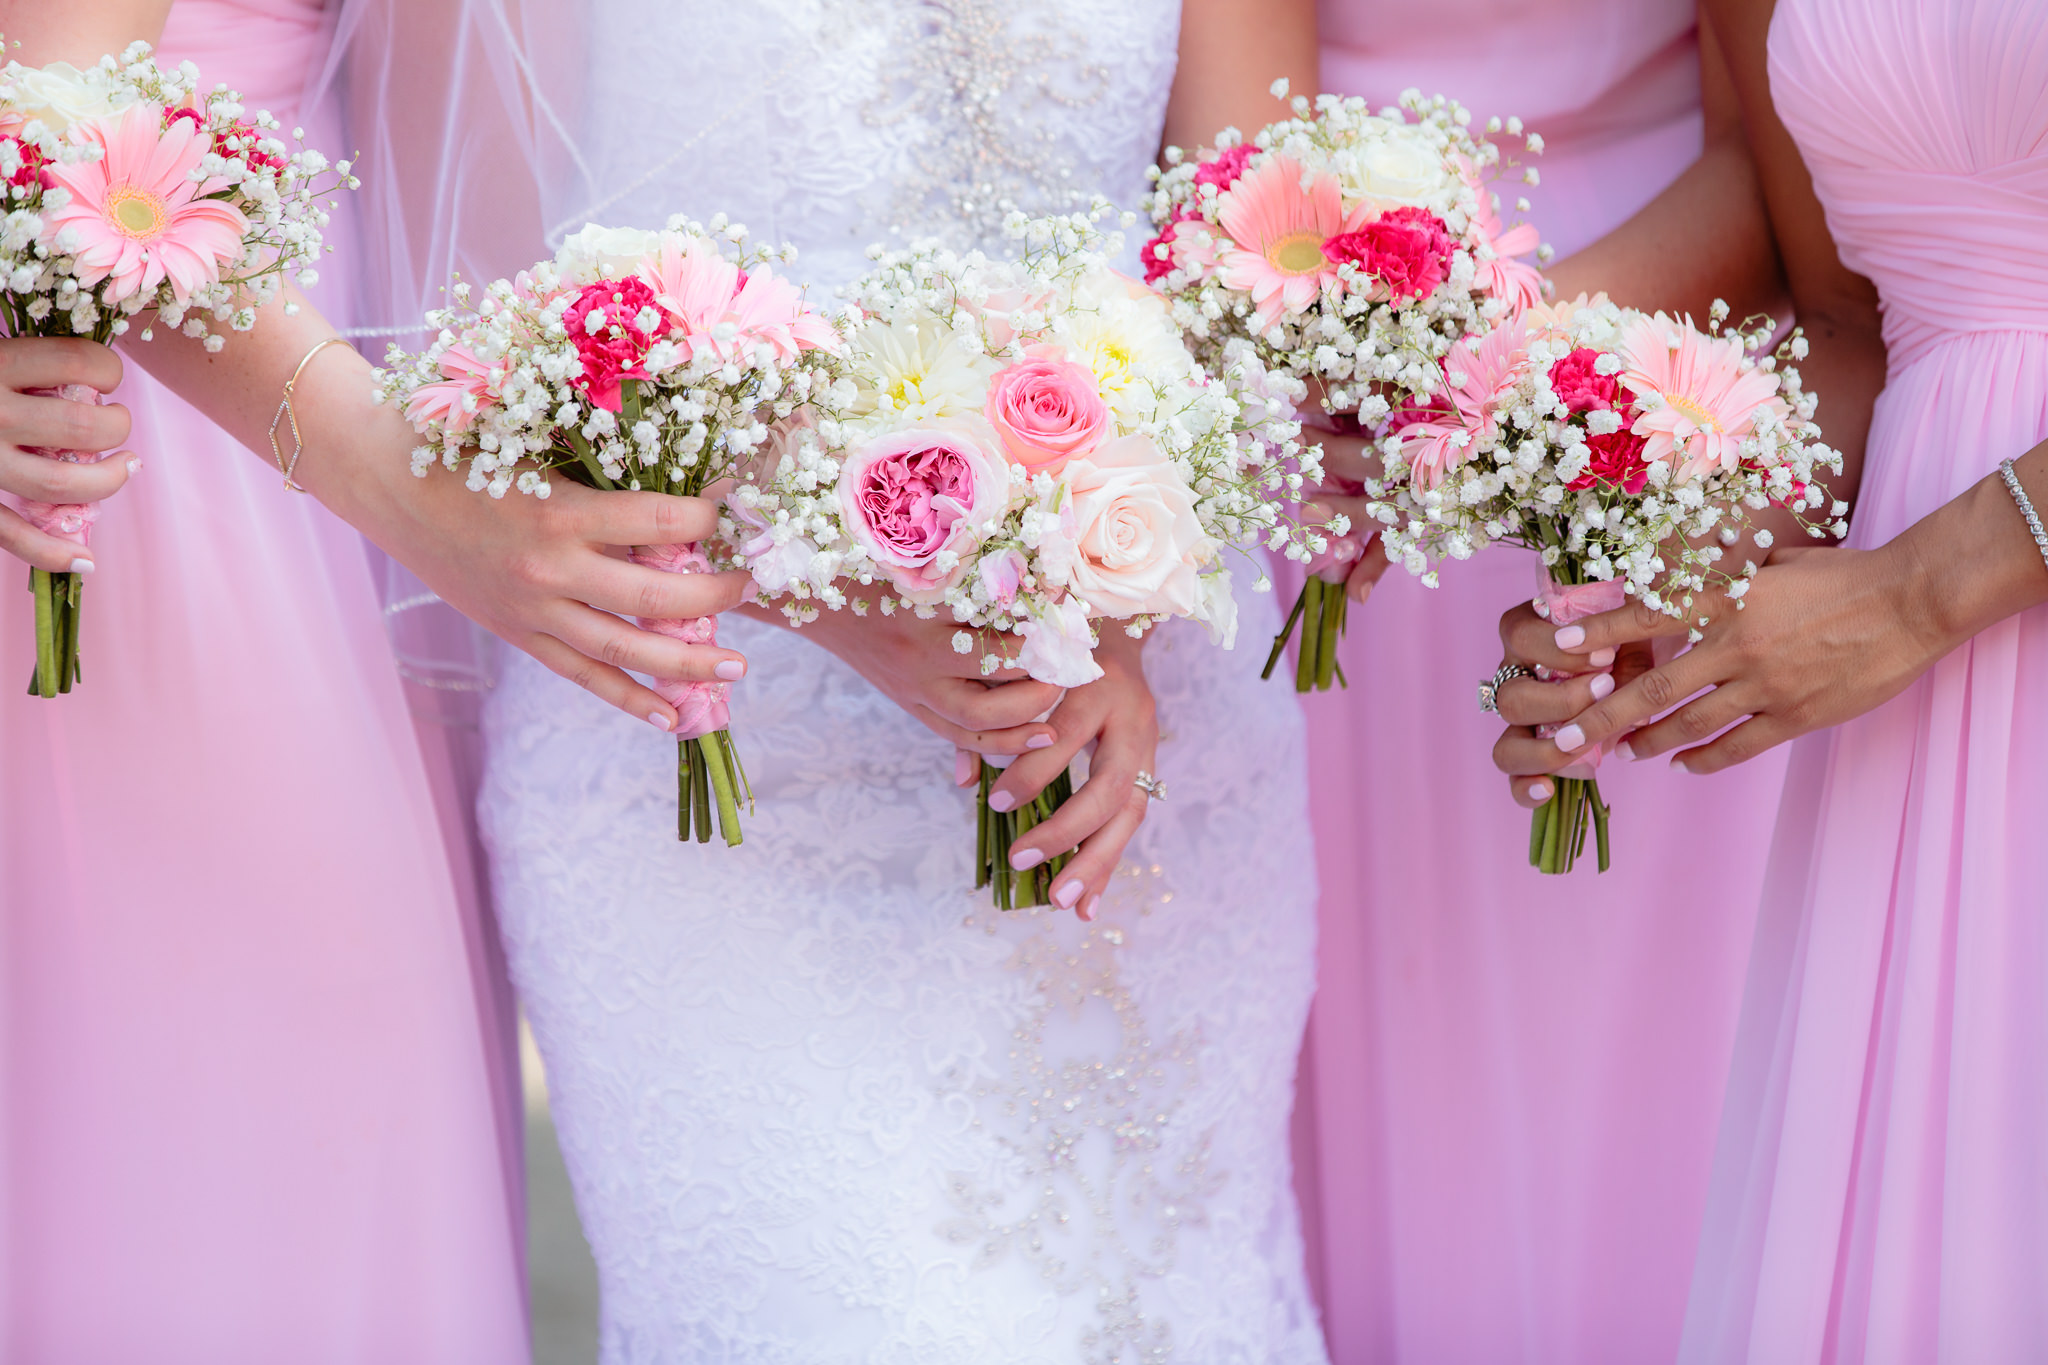 Pink wedding bouquets by Fields of Heather at a Duquesne University wedding